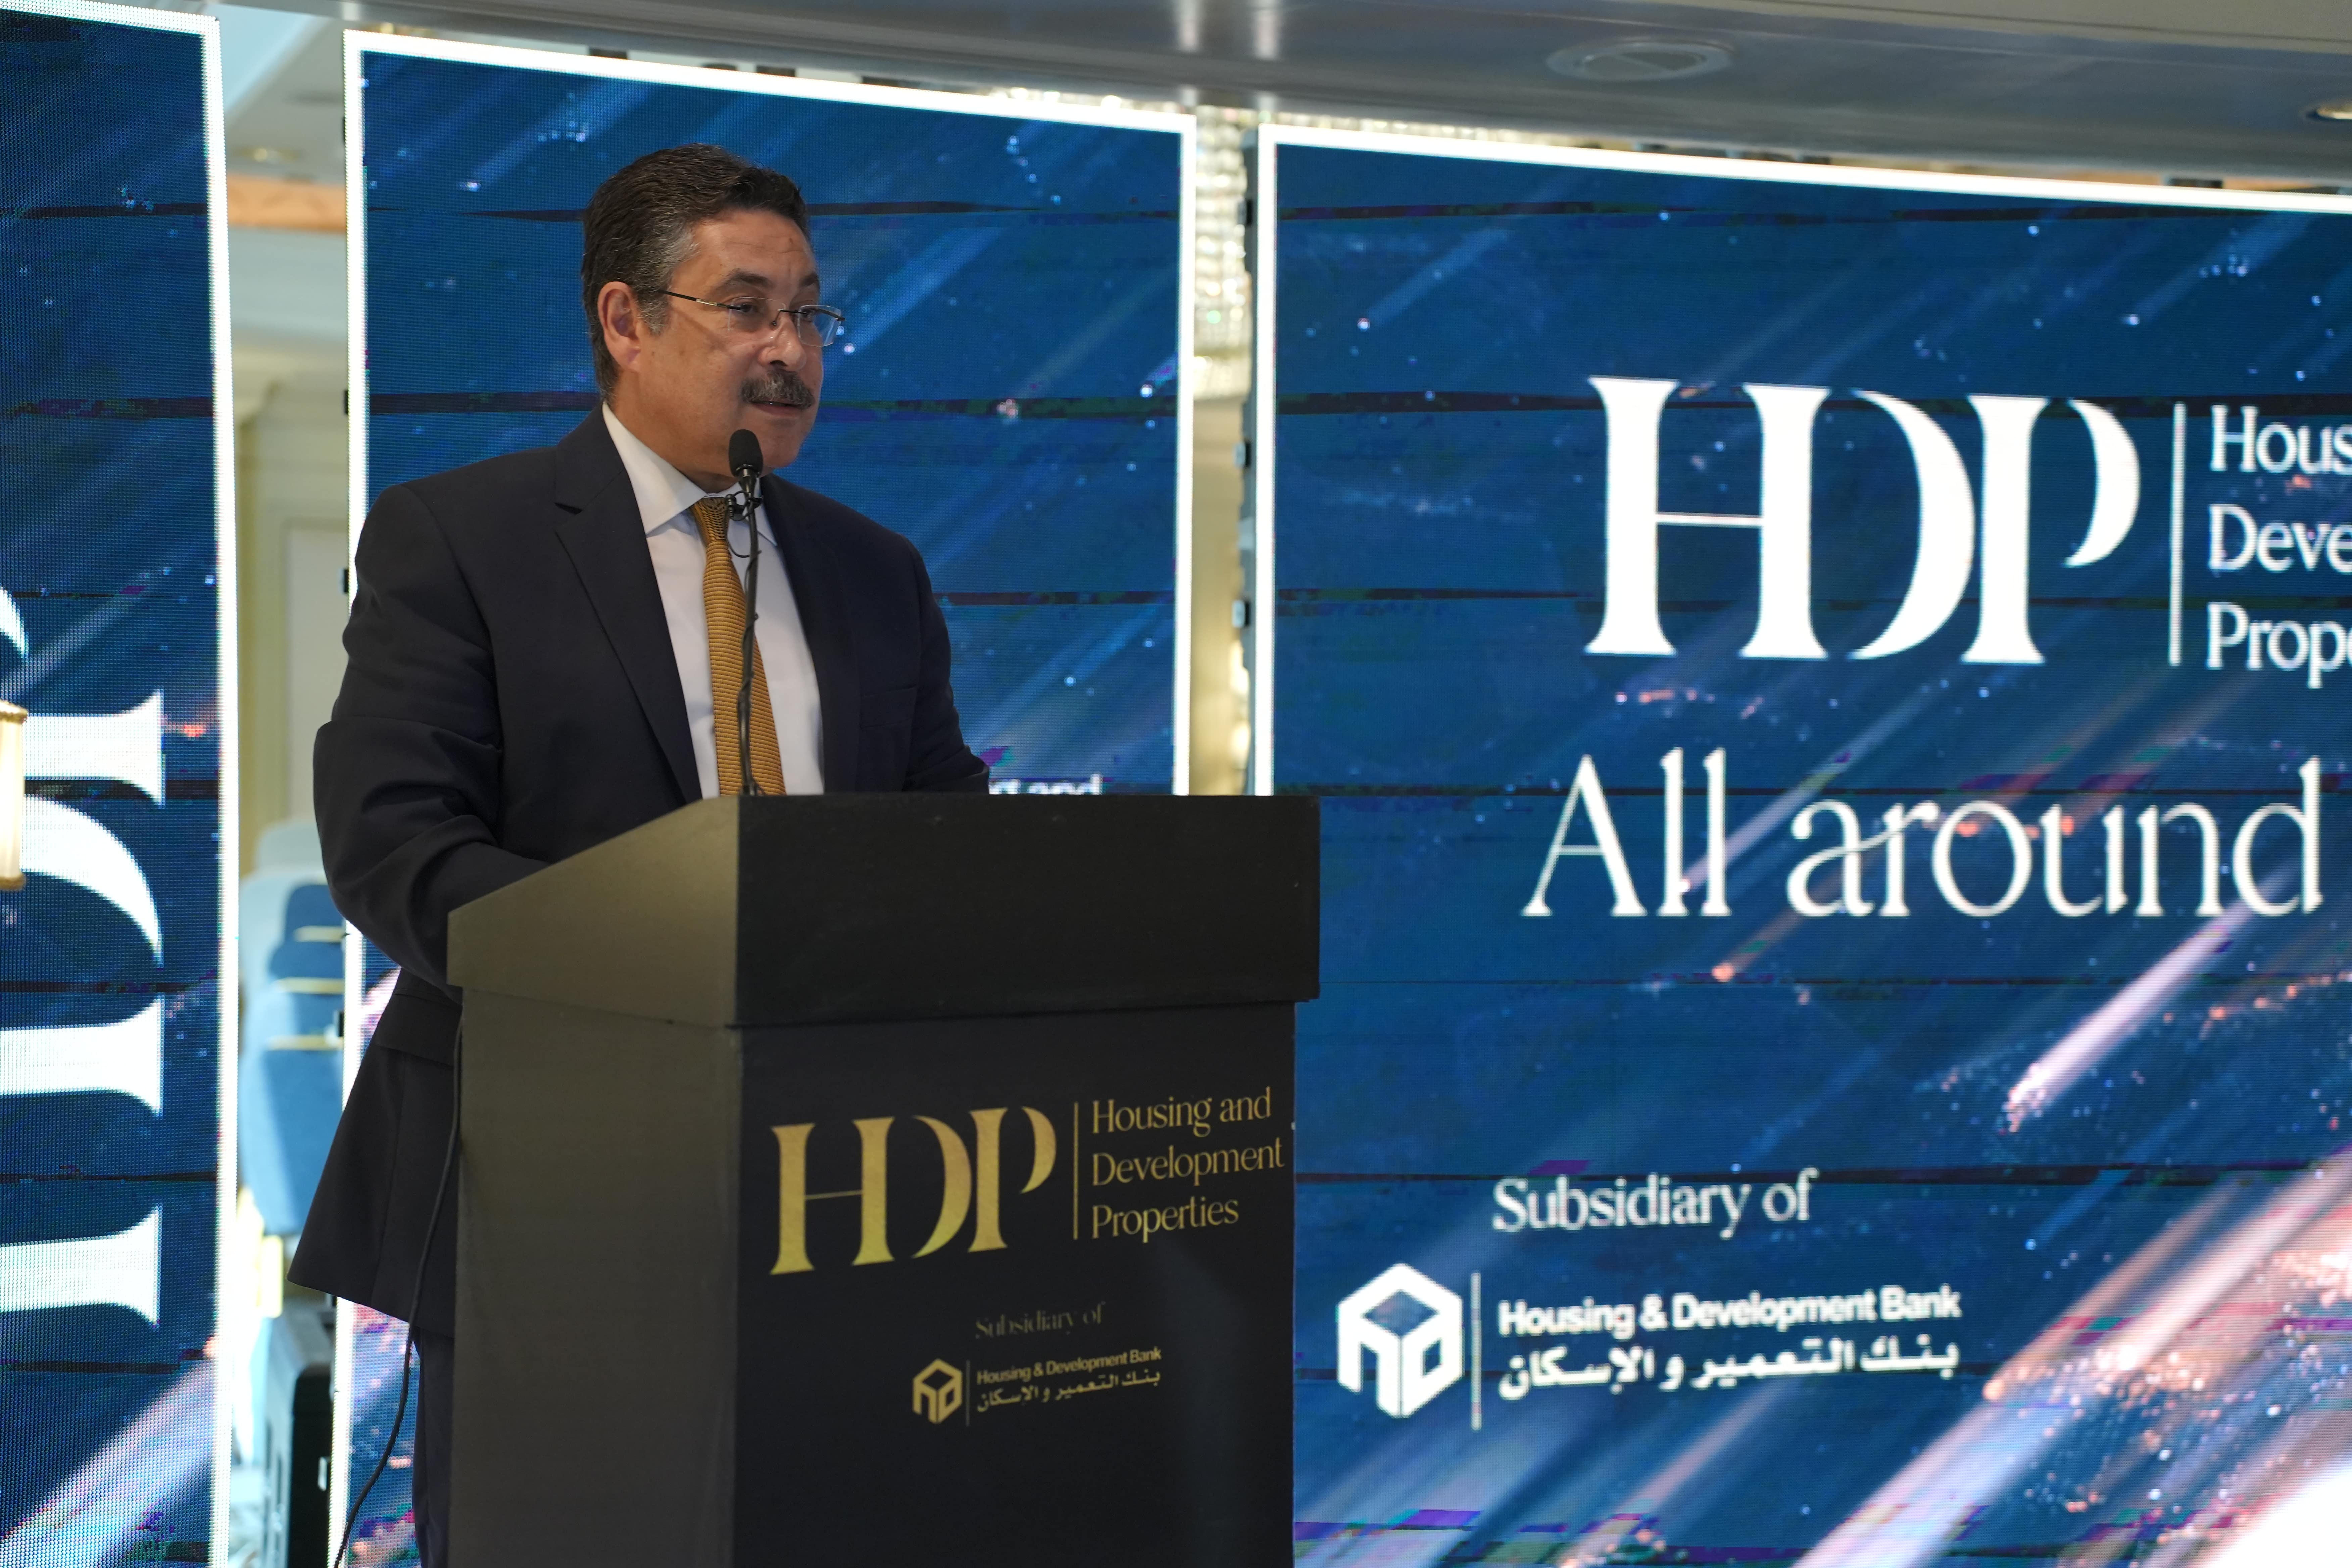 Hassan Ghanem, Chairperson and Managing Director of HDB